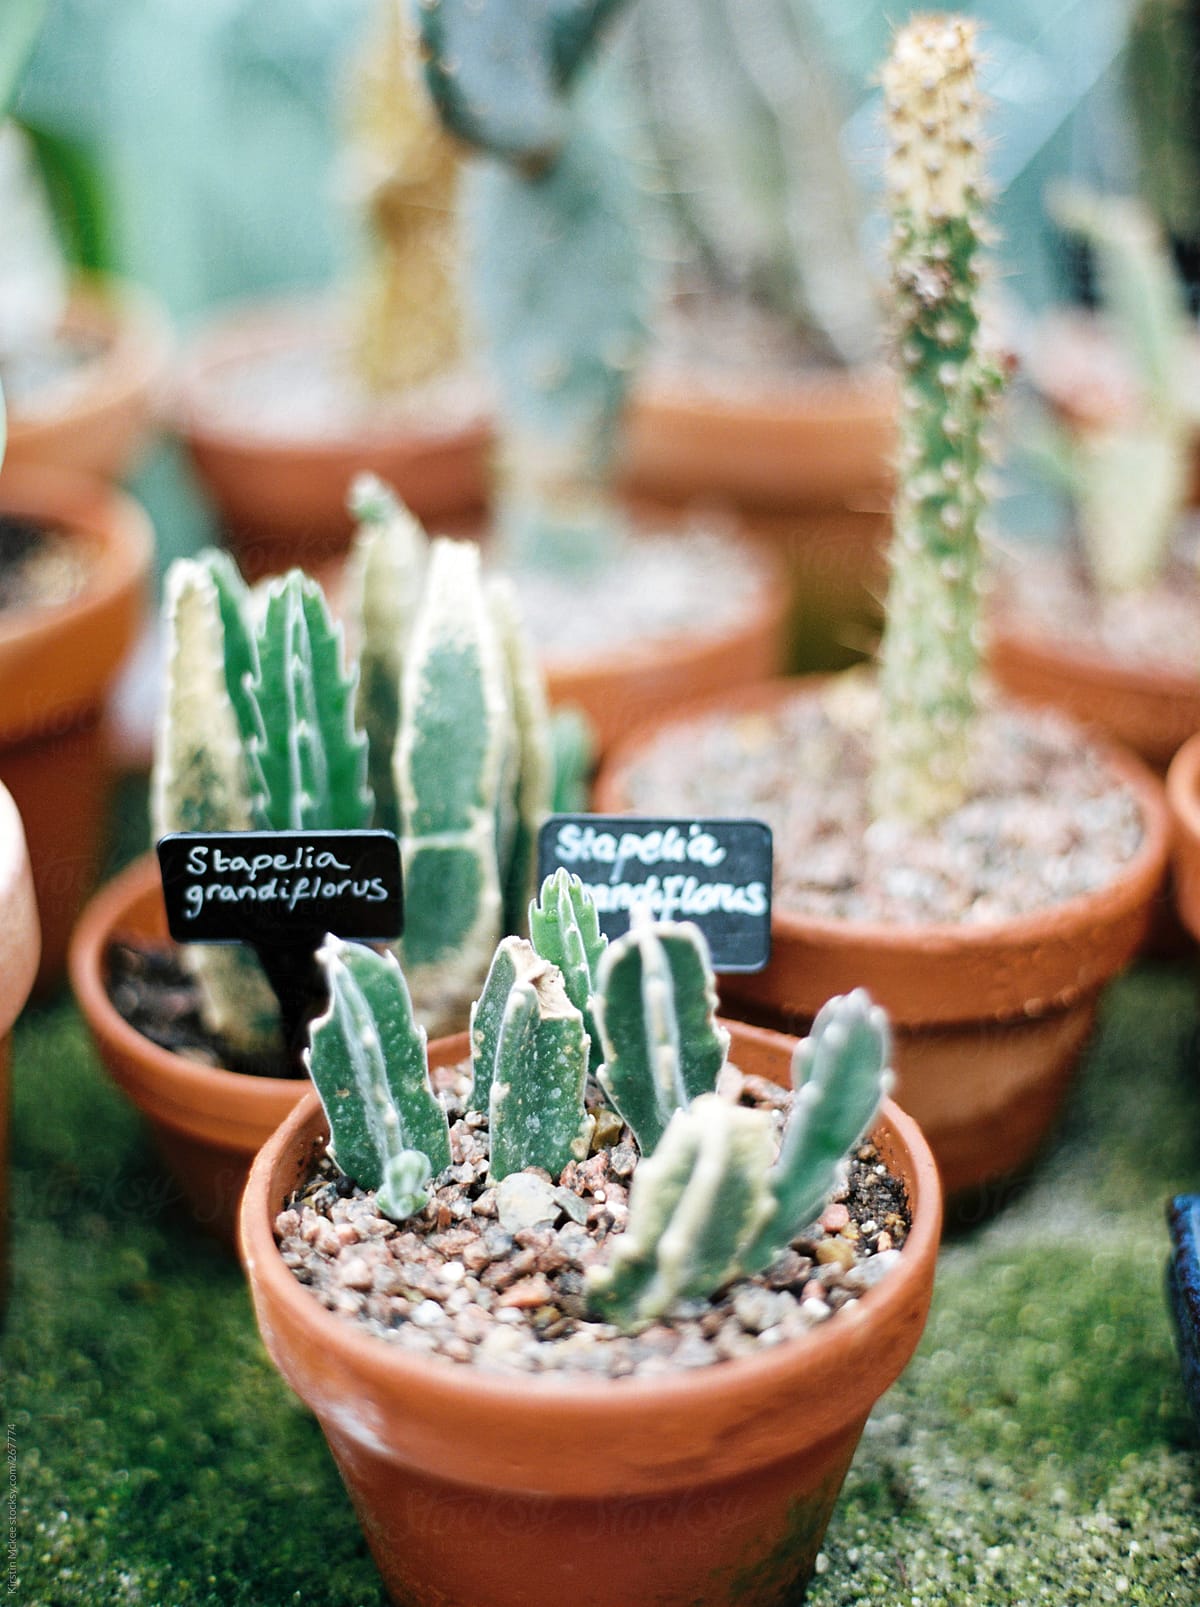 A selection of cactus plants